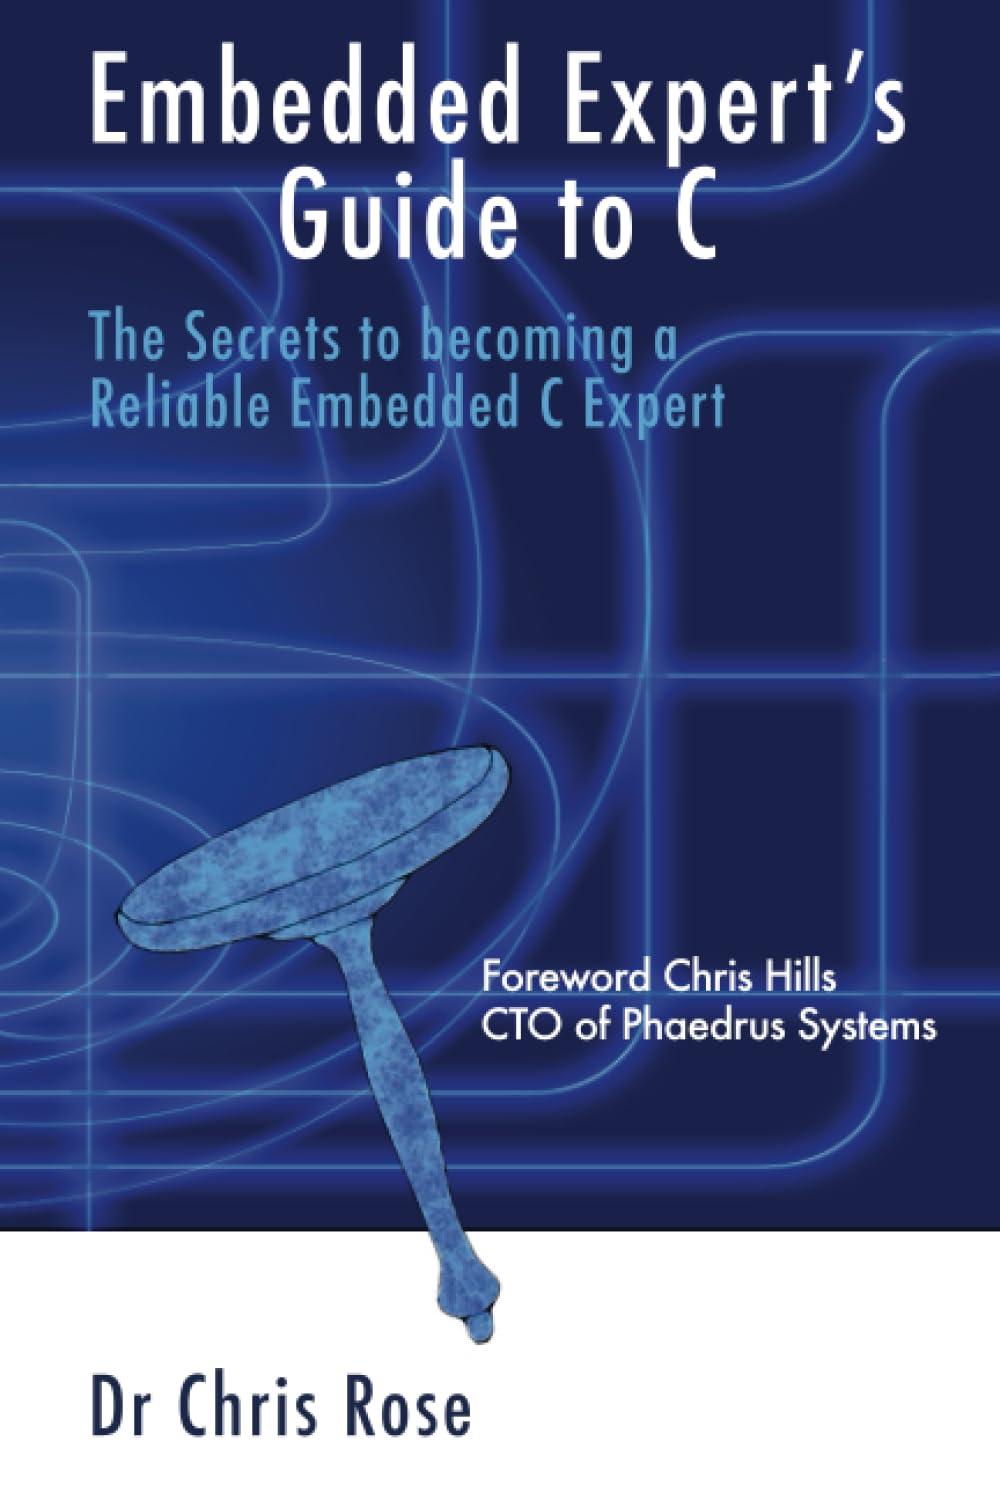 embedded expert's guide to c the secrets to becoming a reliable embedded c expert 1st edition dr chris rose